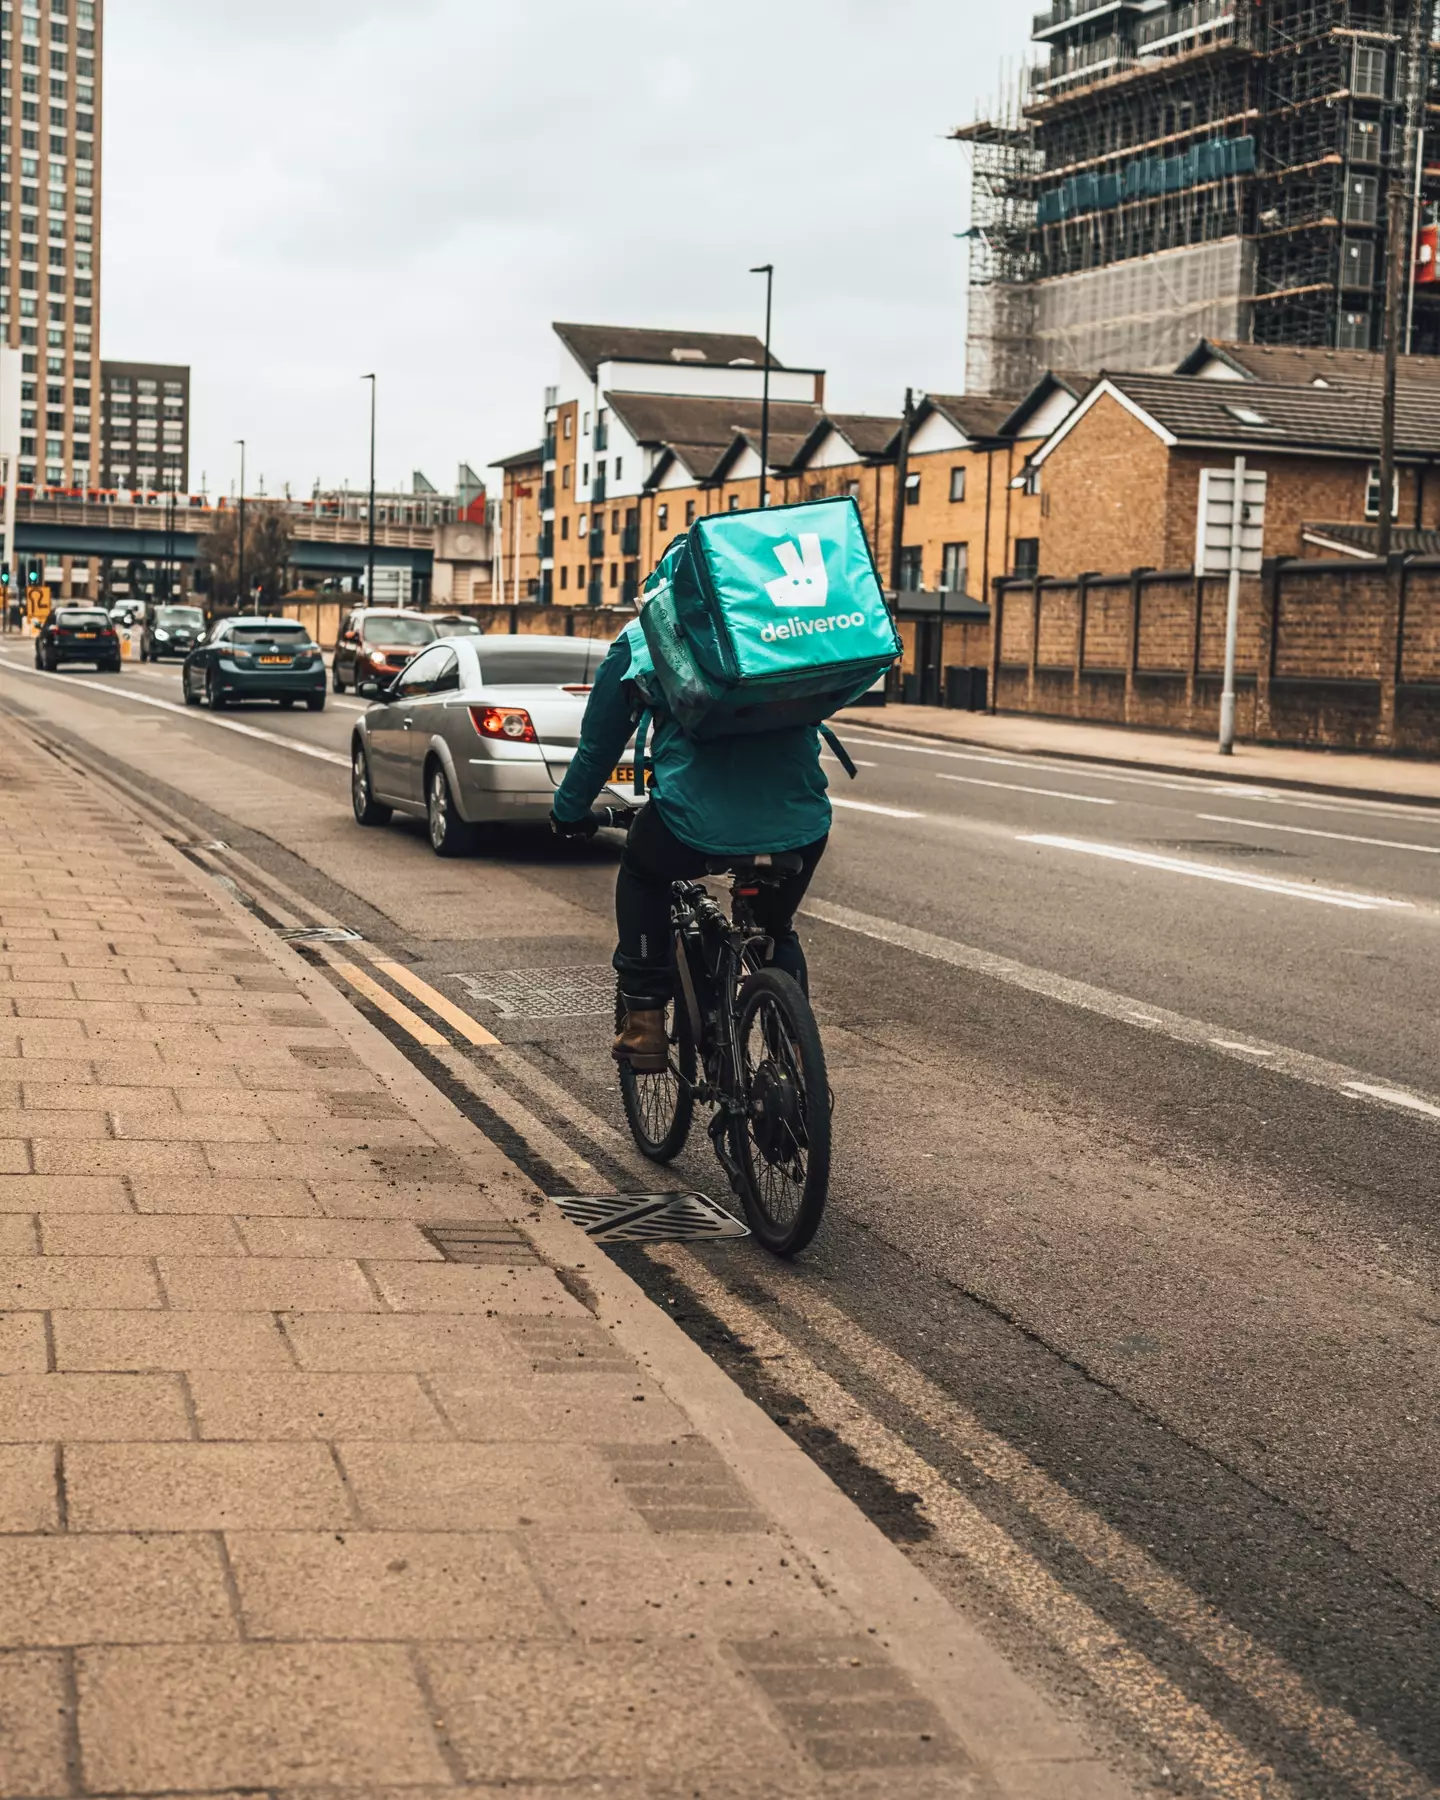 Deliveroo has launched legal action against a UK cannabis dealer for ‘mimicking’ their branding.